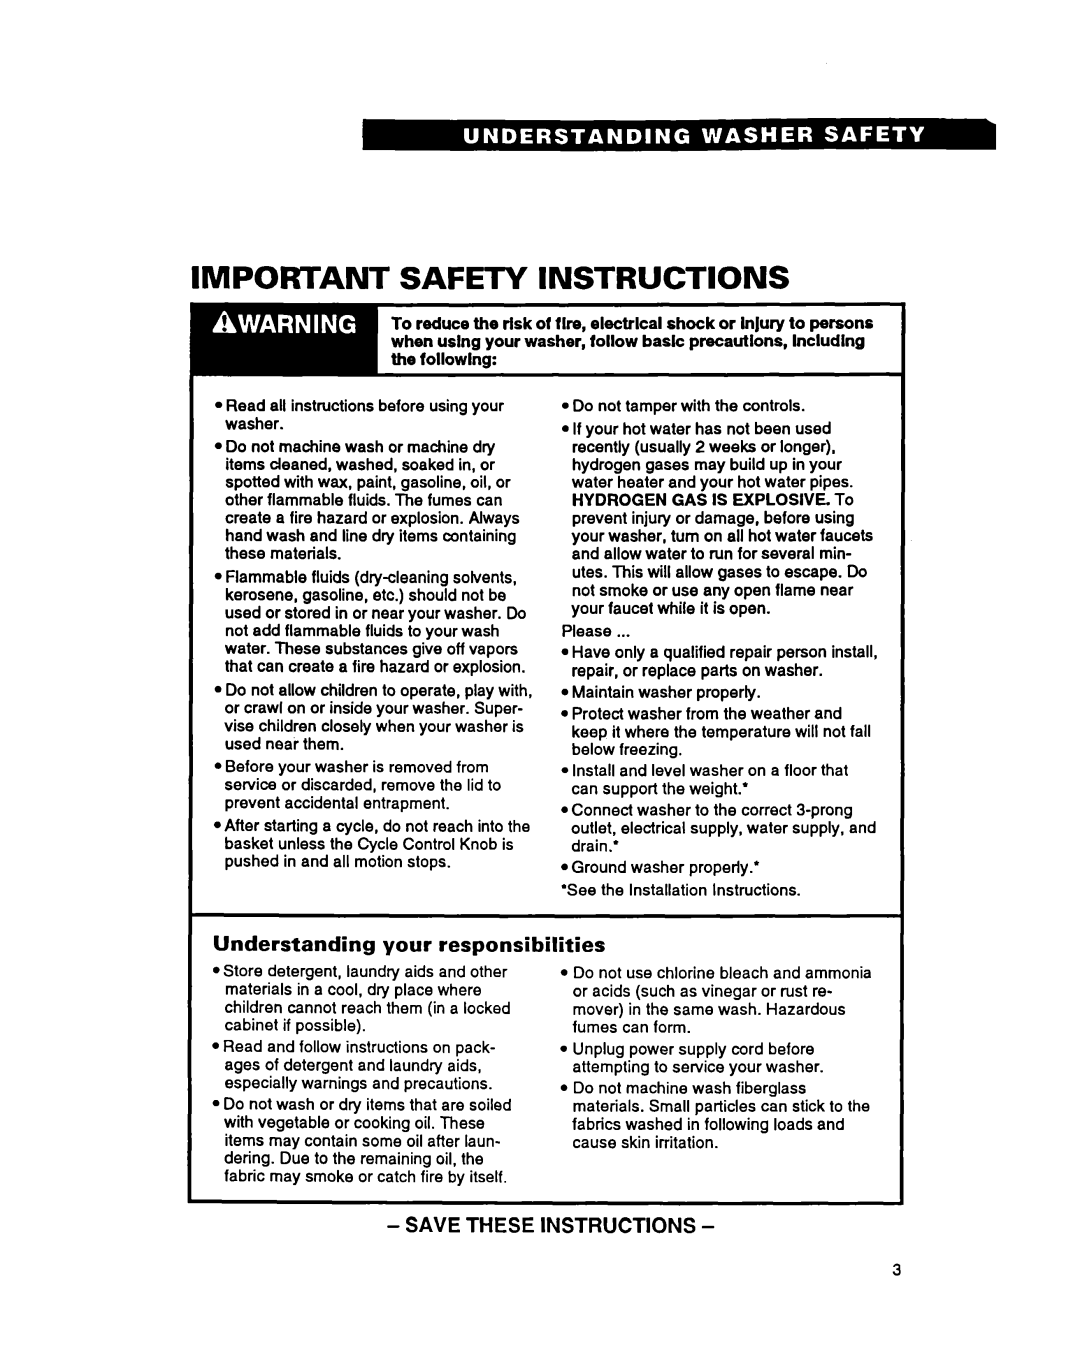 Whirlpool RAM5243A warranty Important Safety Instructions, Understanding your responsibilities, Save These Instructions 